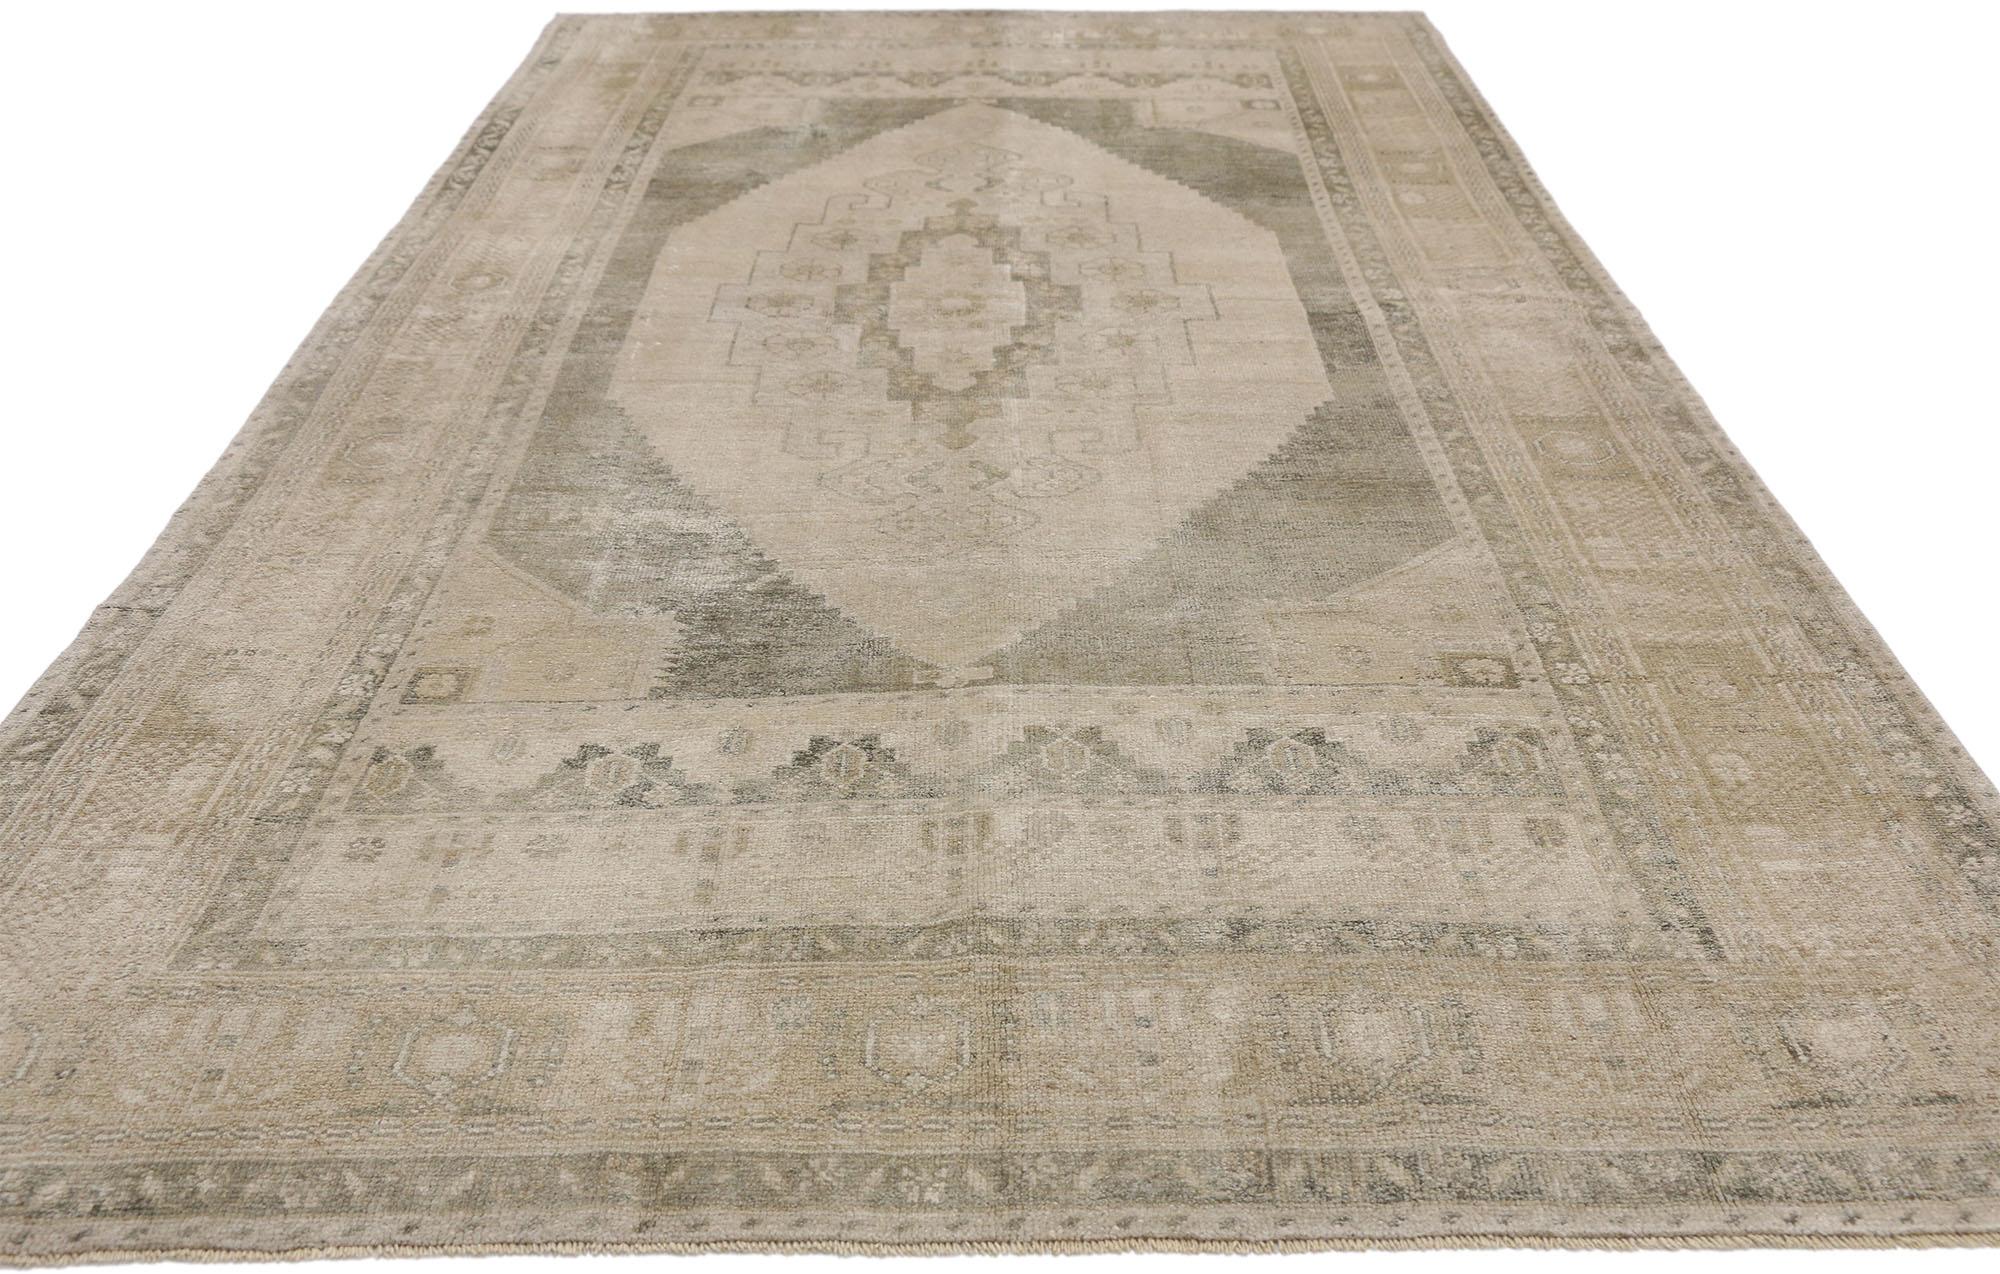 52441 Vintage Turkish Oushak Rug with Shaker Style. In this hand knotted wool vintage Turkish Oushak rug, we bare witness to the successful application of design principles touted by the Shaker aesthetic. With reverence for a unique way of life,